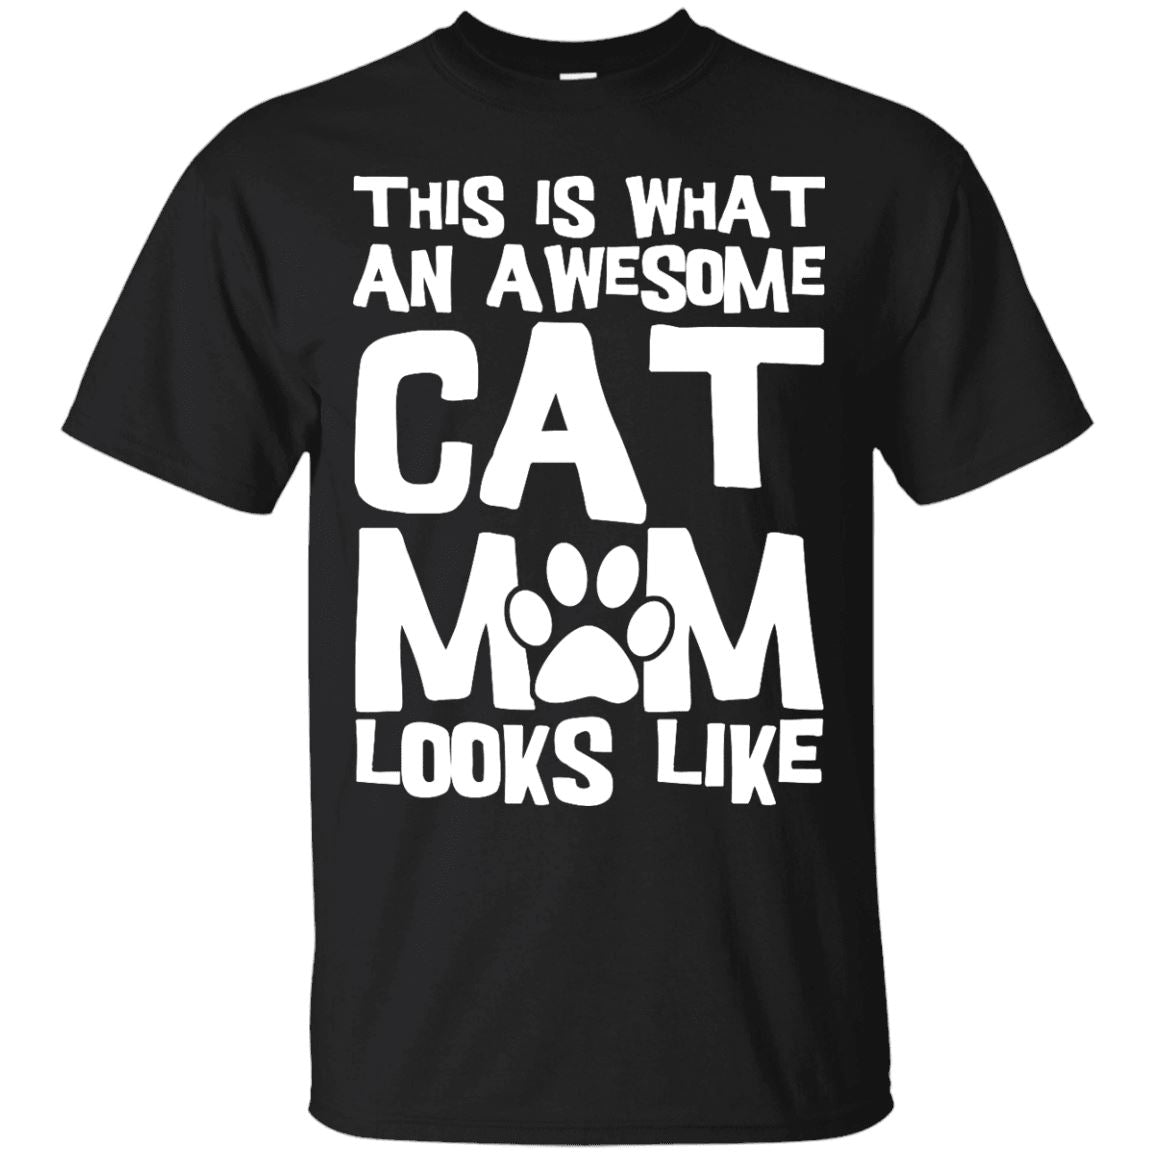 Cat Tee - This Is What An Awesome Cat Mom Looks Like - CatsForLife